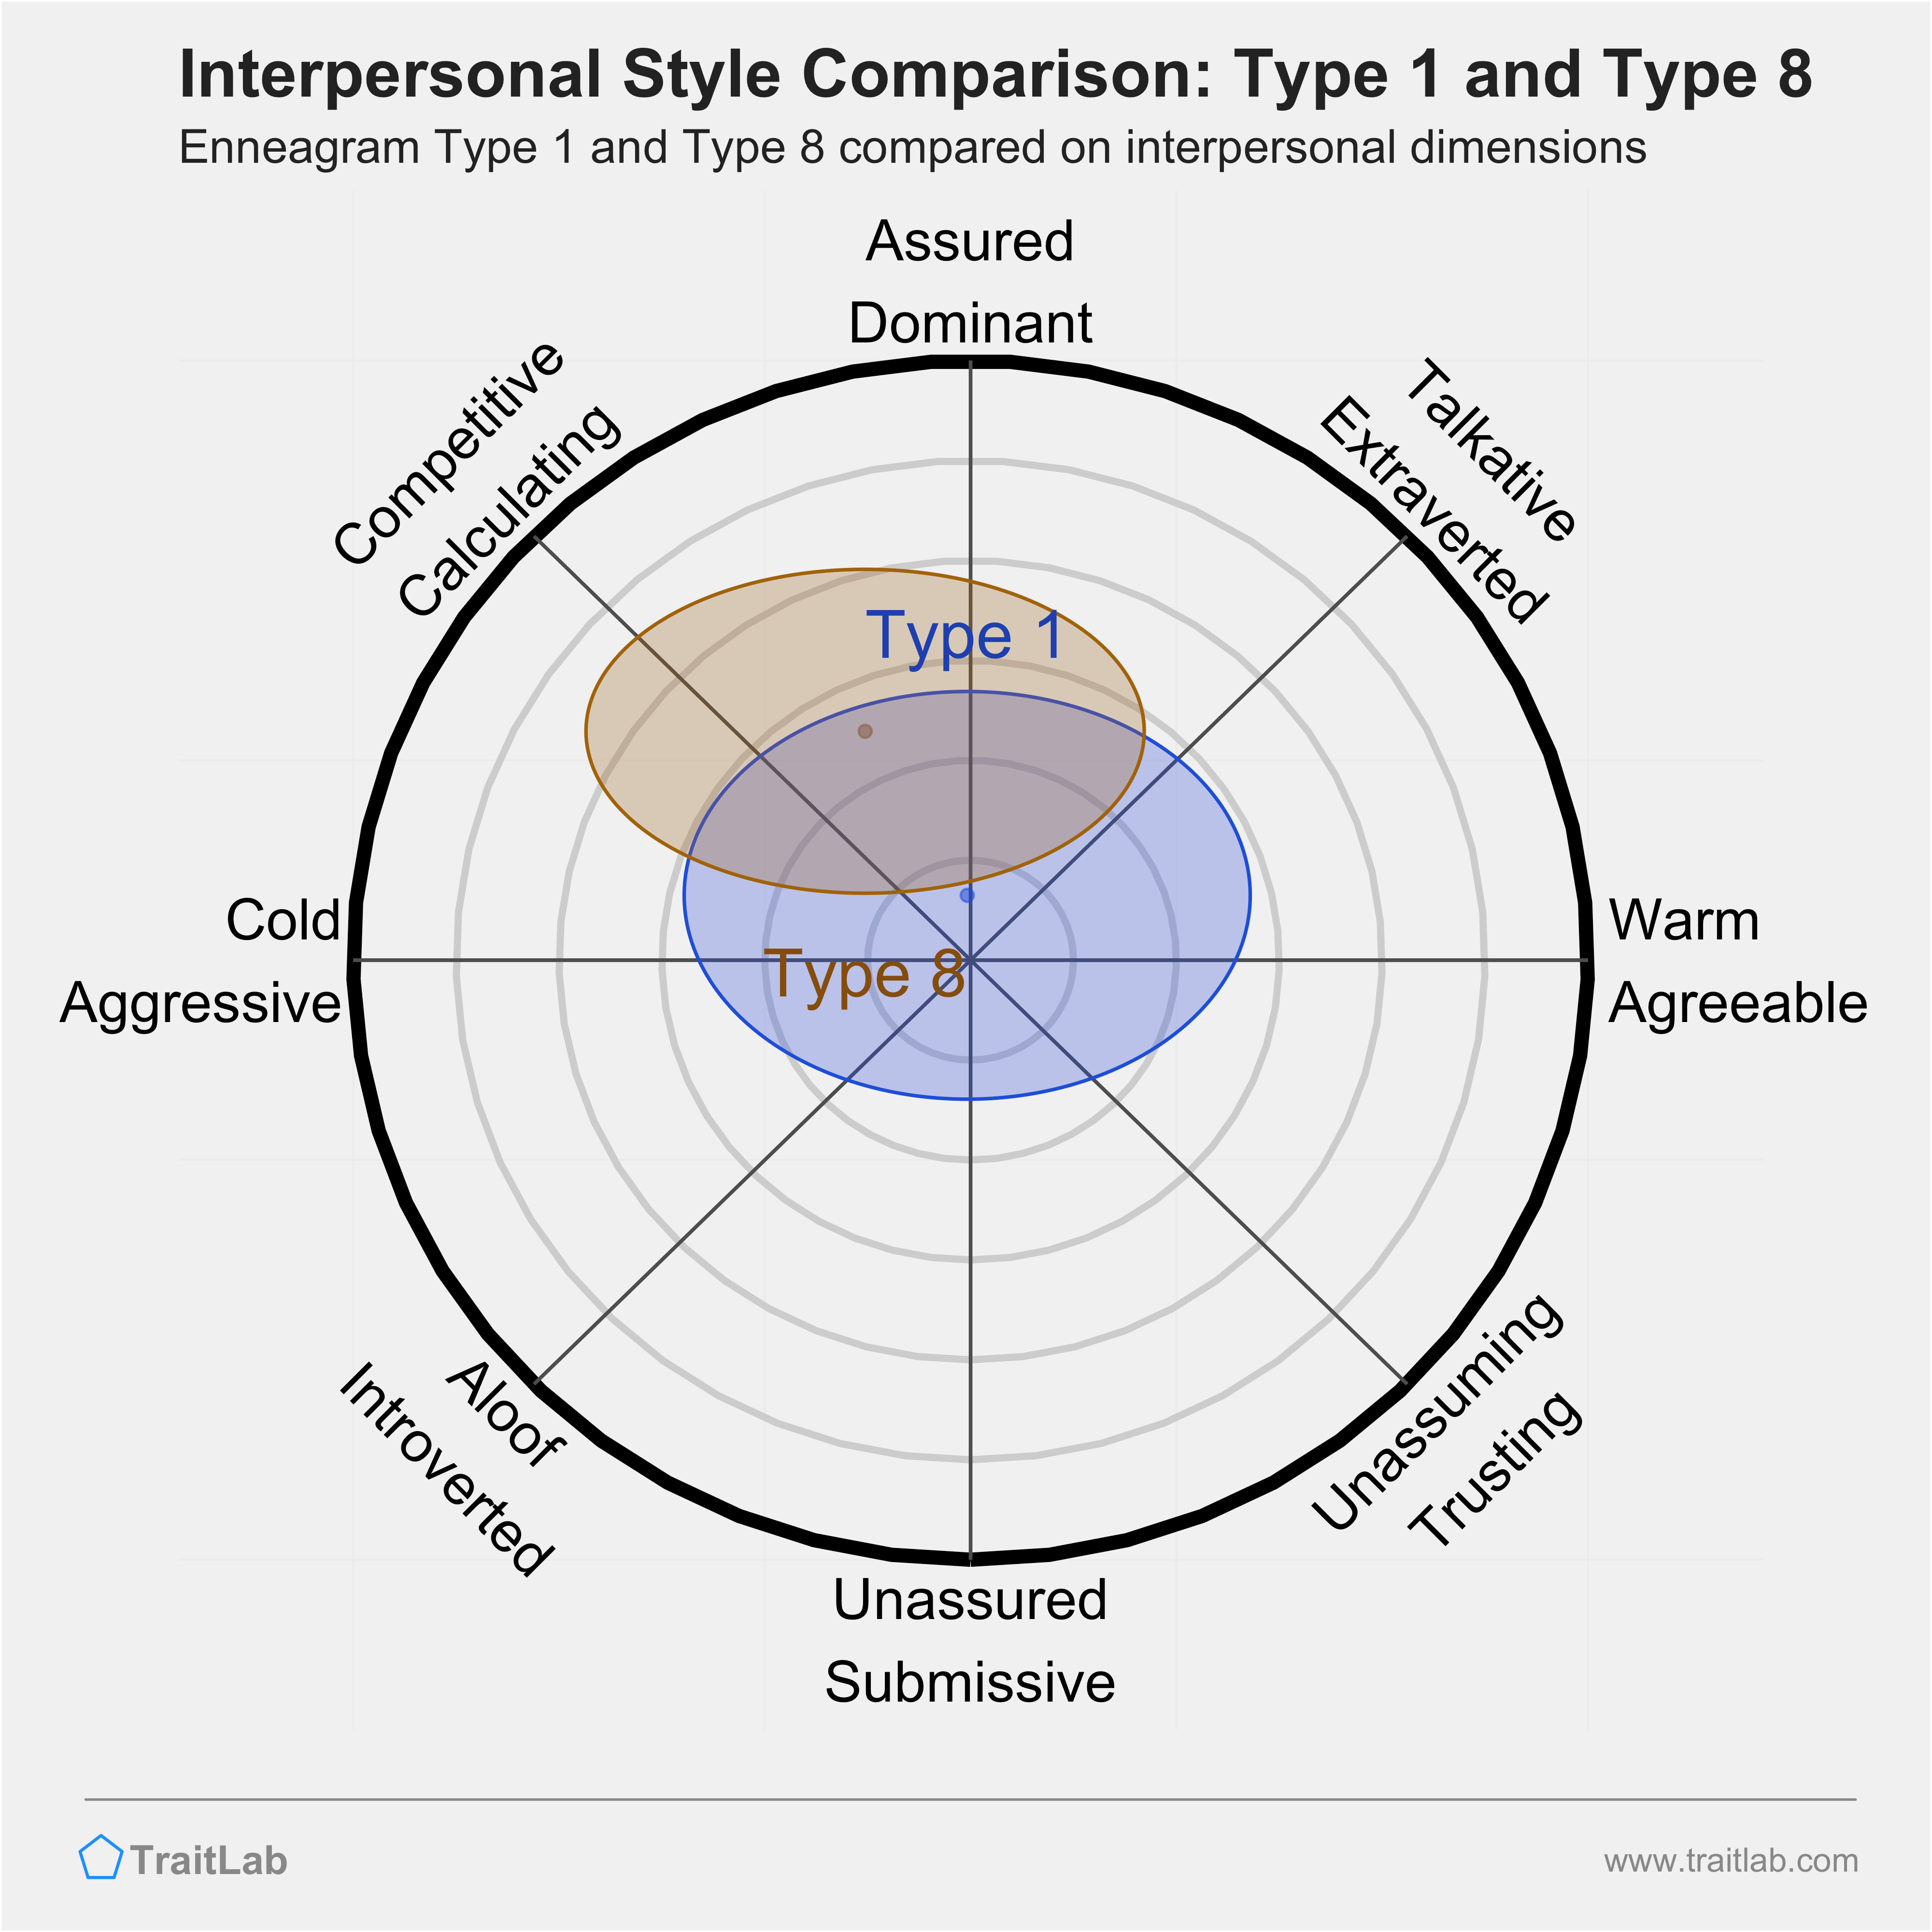 Enneagram Type 1 and Type 8 comparison across interpersonal dimensions